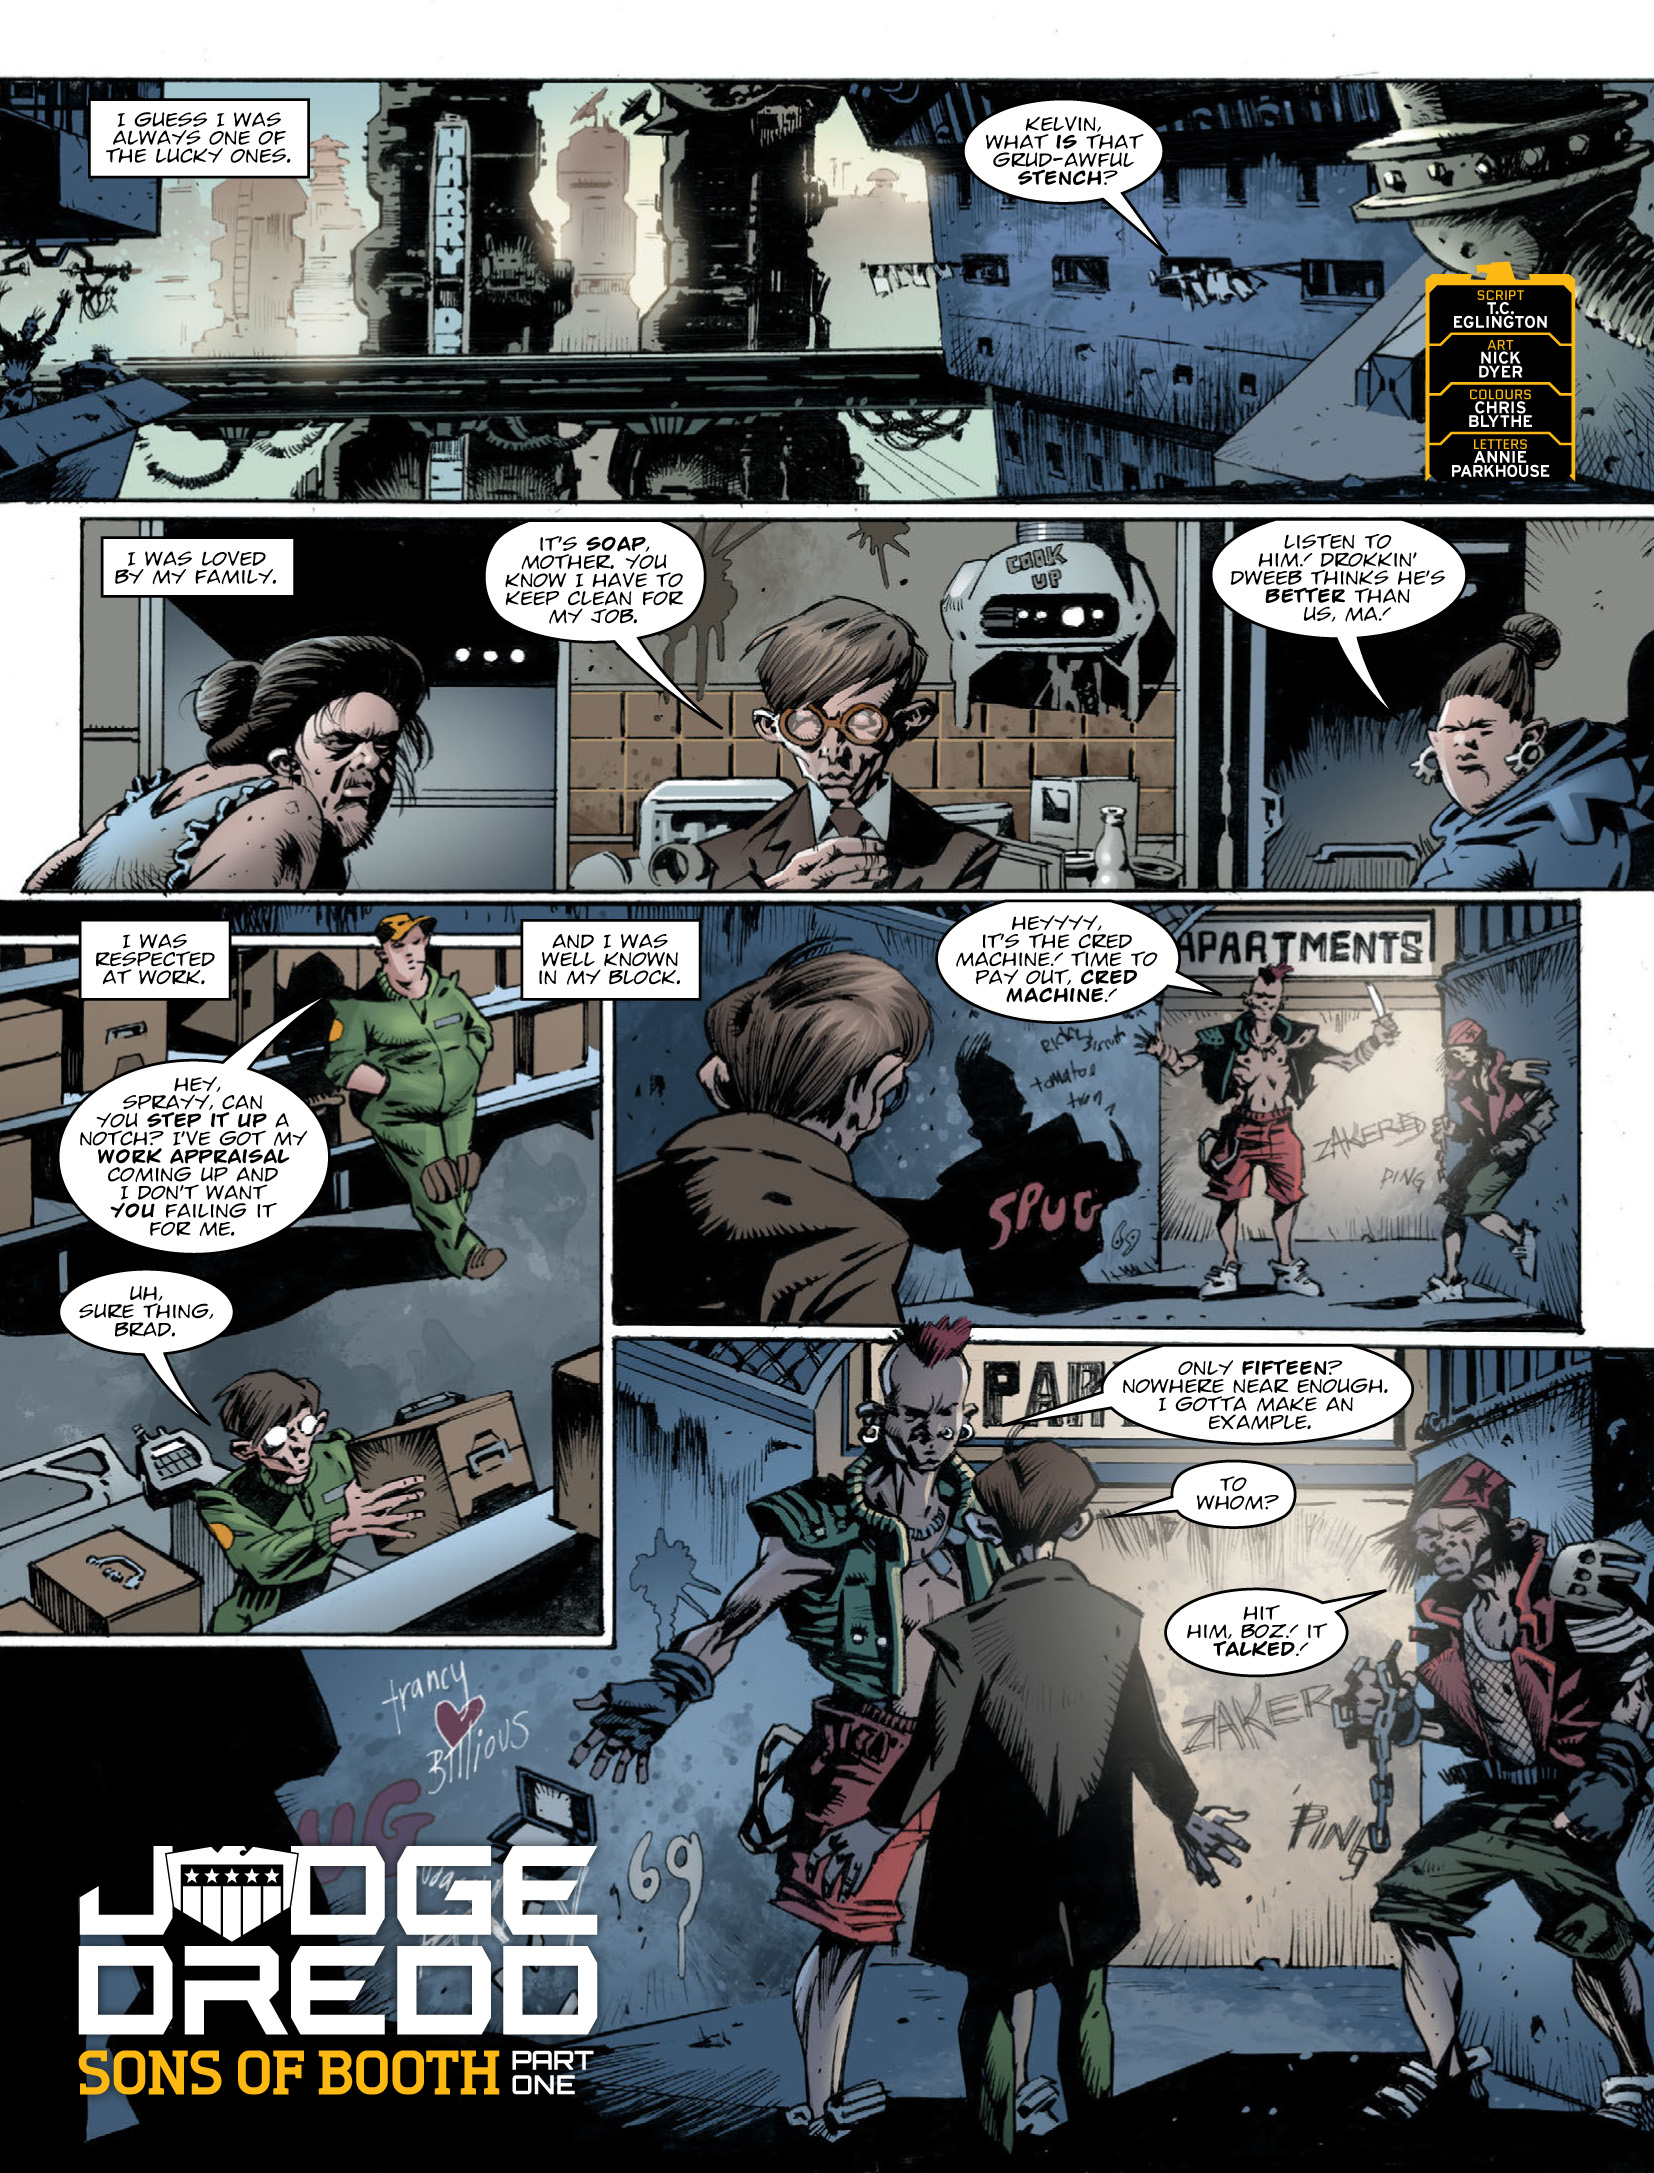 2000 AD: Chapter 2030 - Page 3